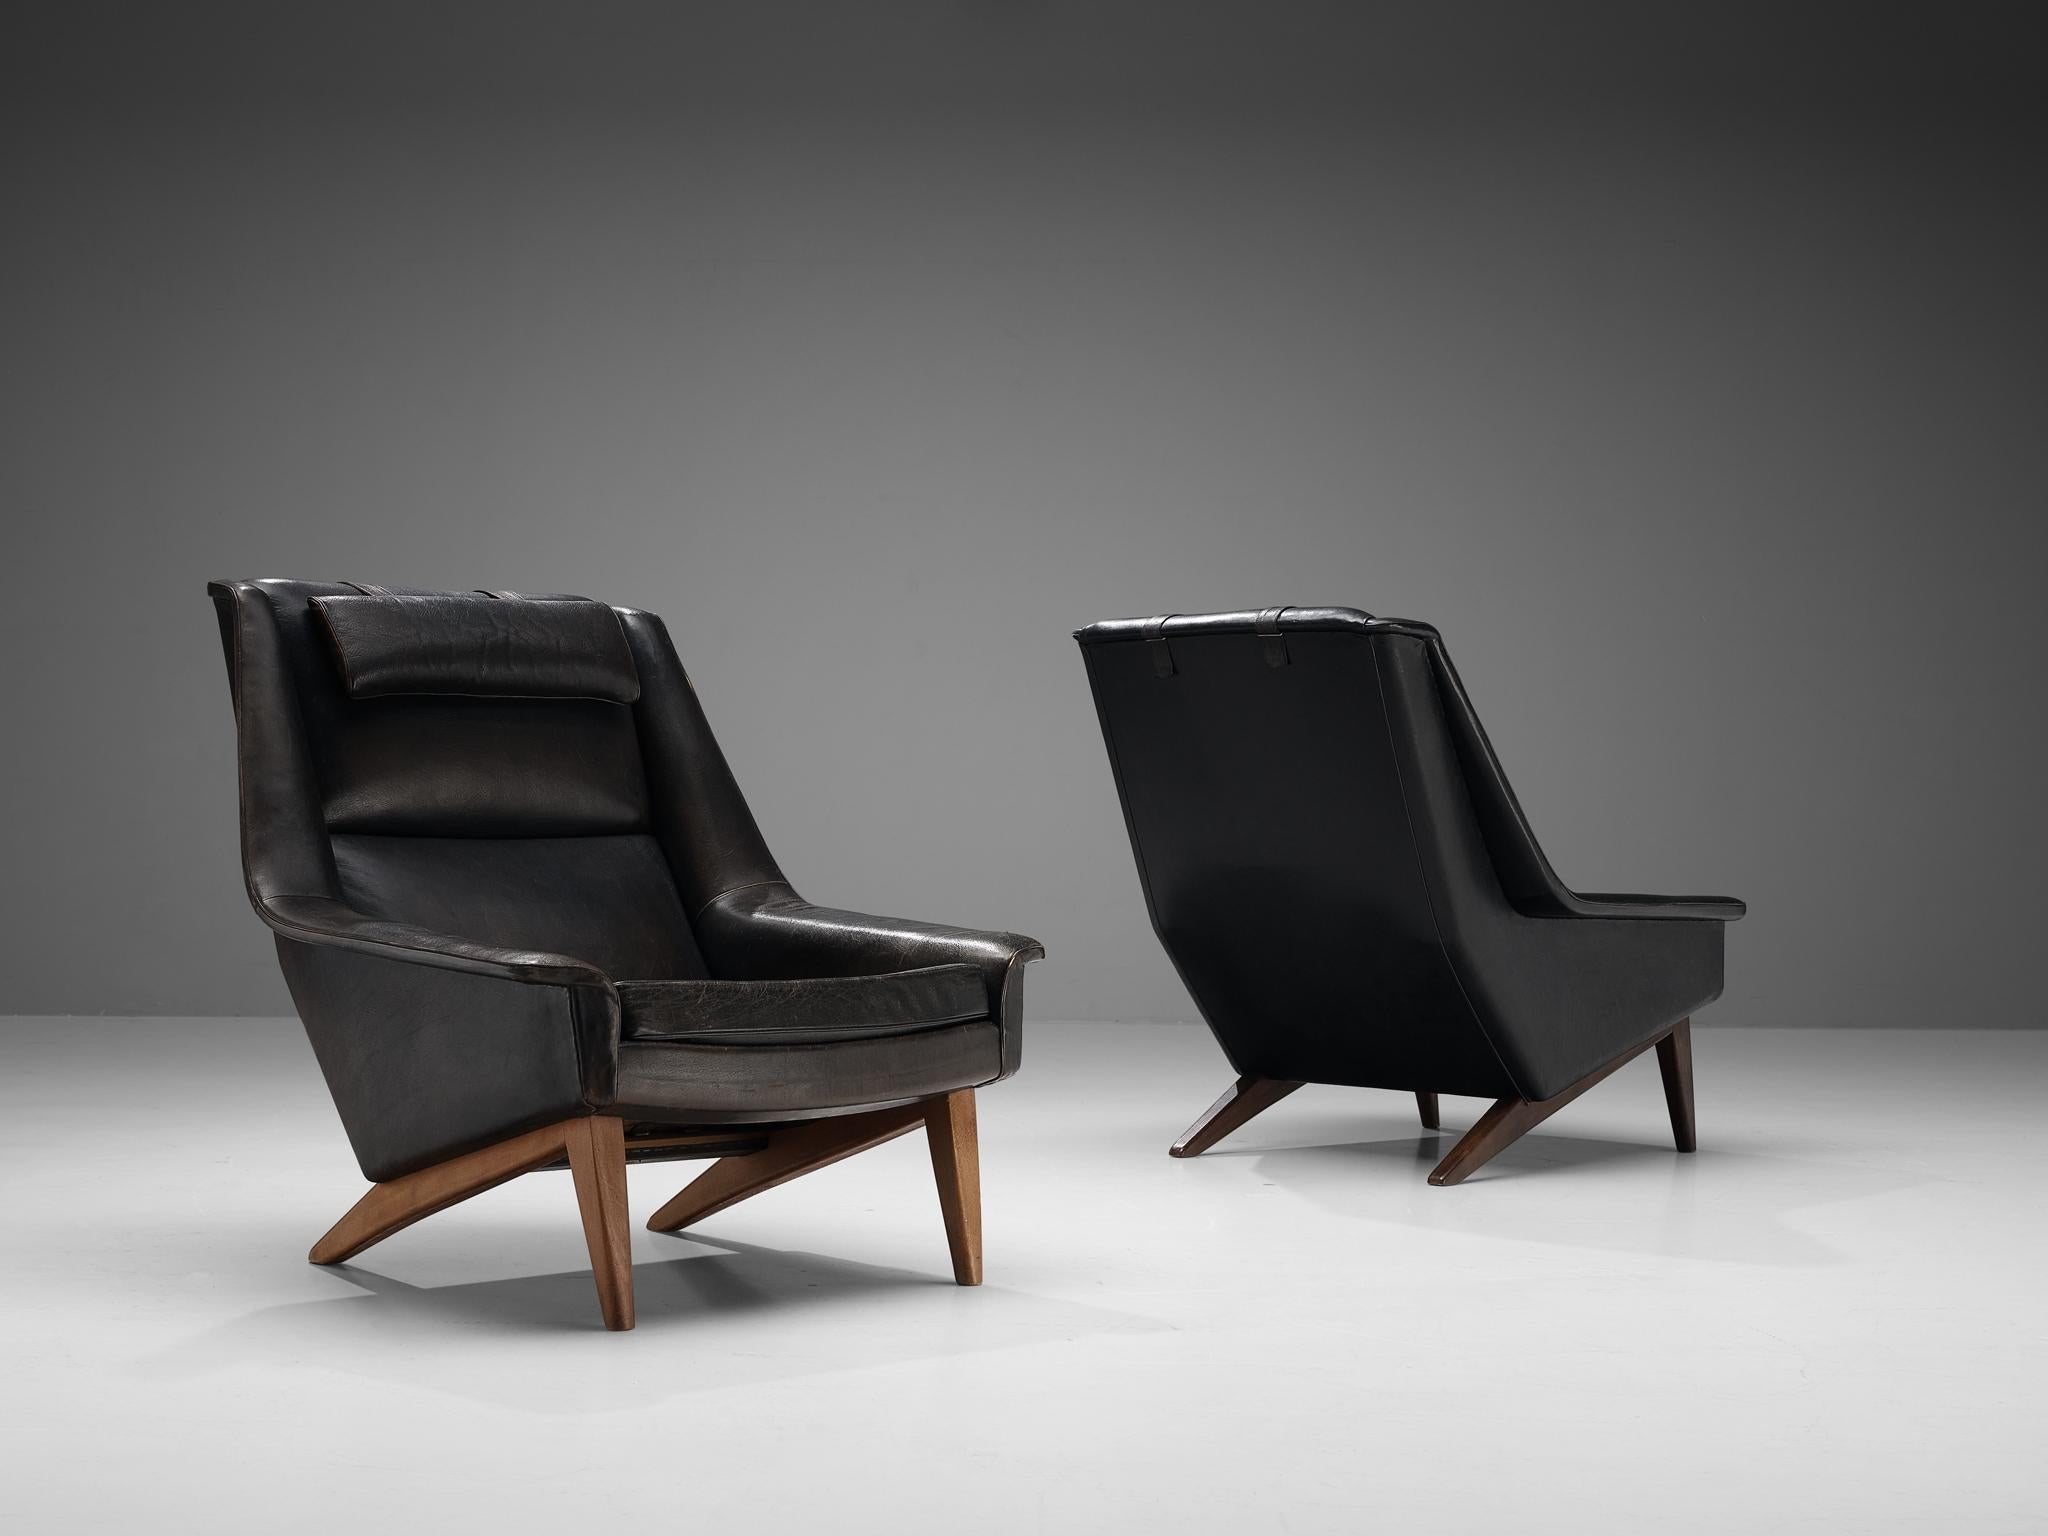 Folke Ohlsson for Fritz Hansen, easy chairs, model '4410', patinated leather, beech, Denmark, designed in 1957

These high quality lounge chairs are characterized by a stylish timeless design based on elegant shapes and clean lines. The slightly